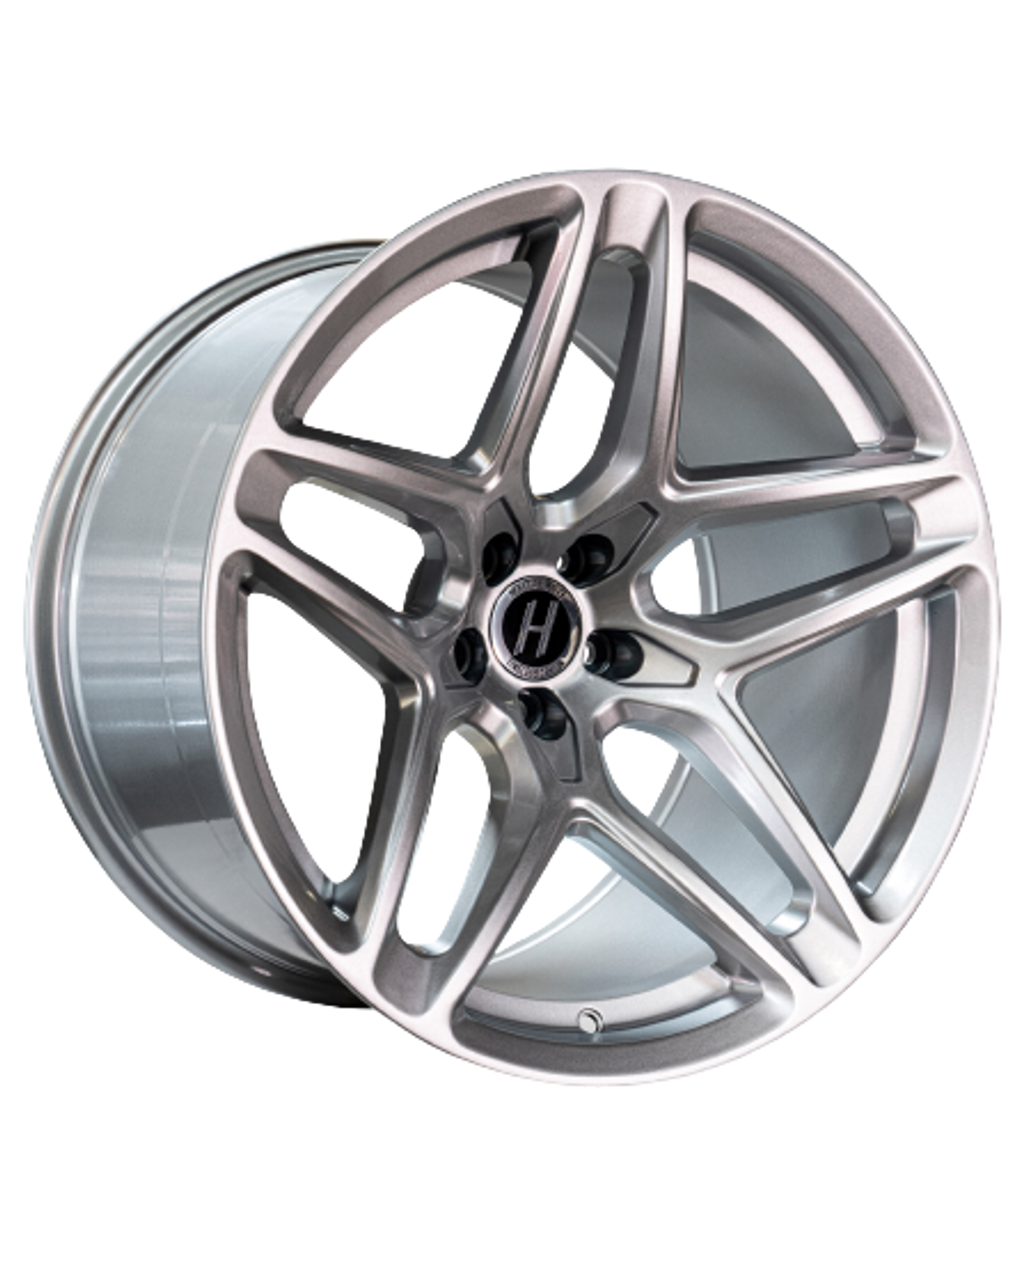 Custom Tires, Custom Wheels, Wheel and Tire Packages, Chrome Rims for your  Car, Truck, or SUV from Performance Plus Wheel and Tire